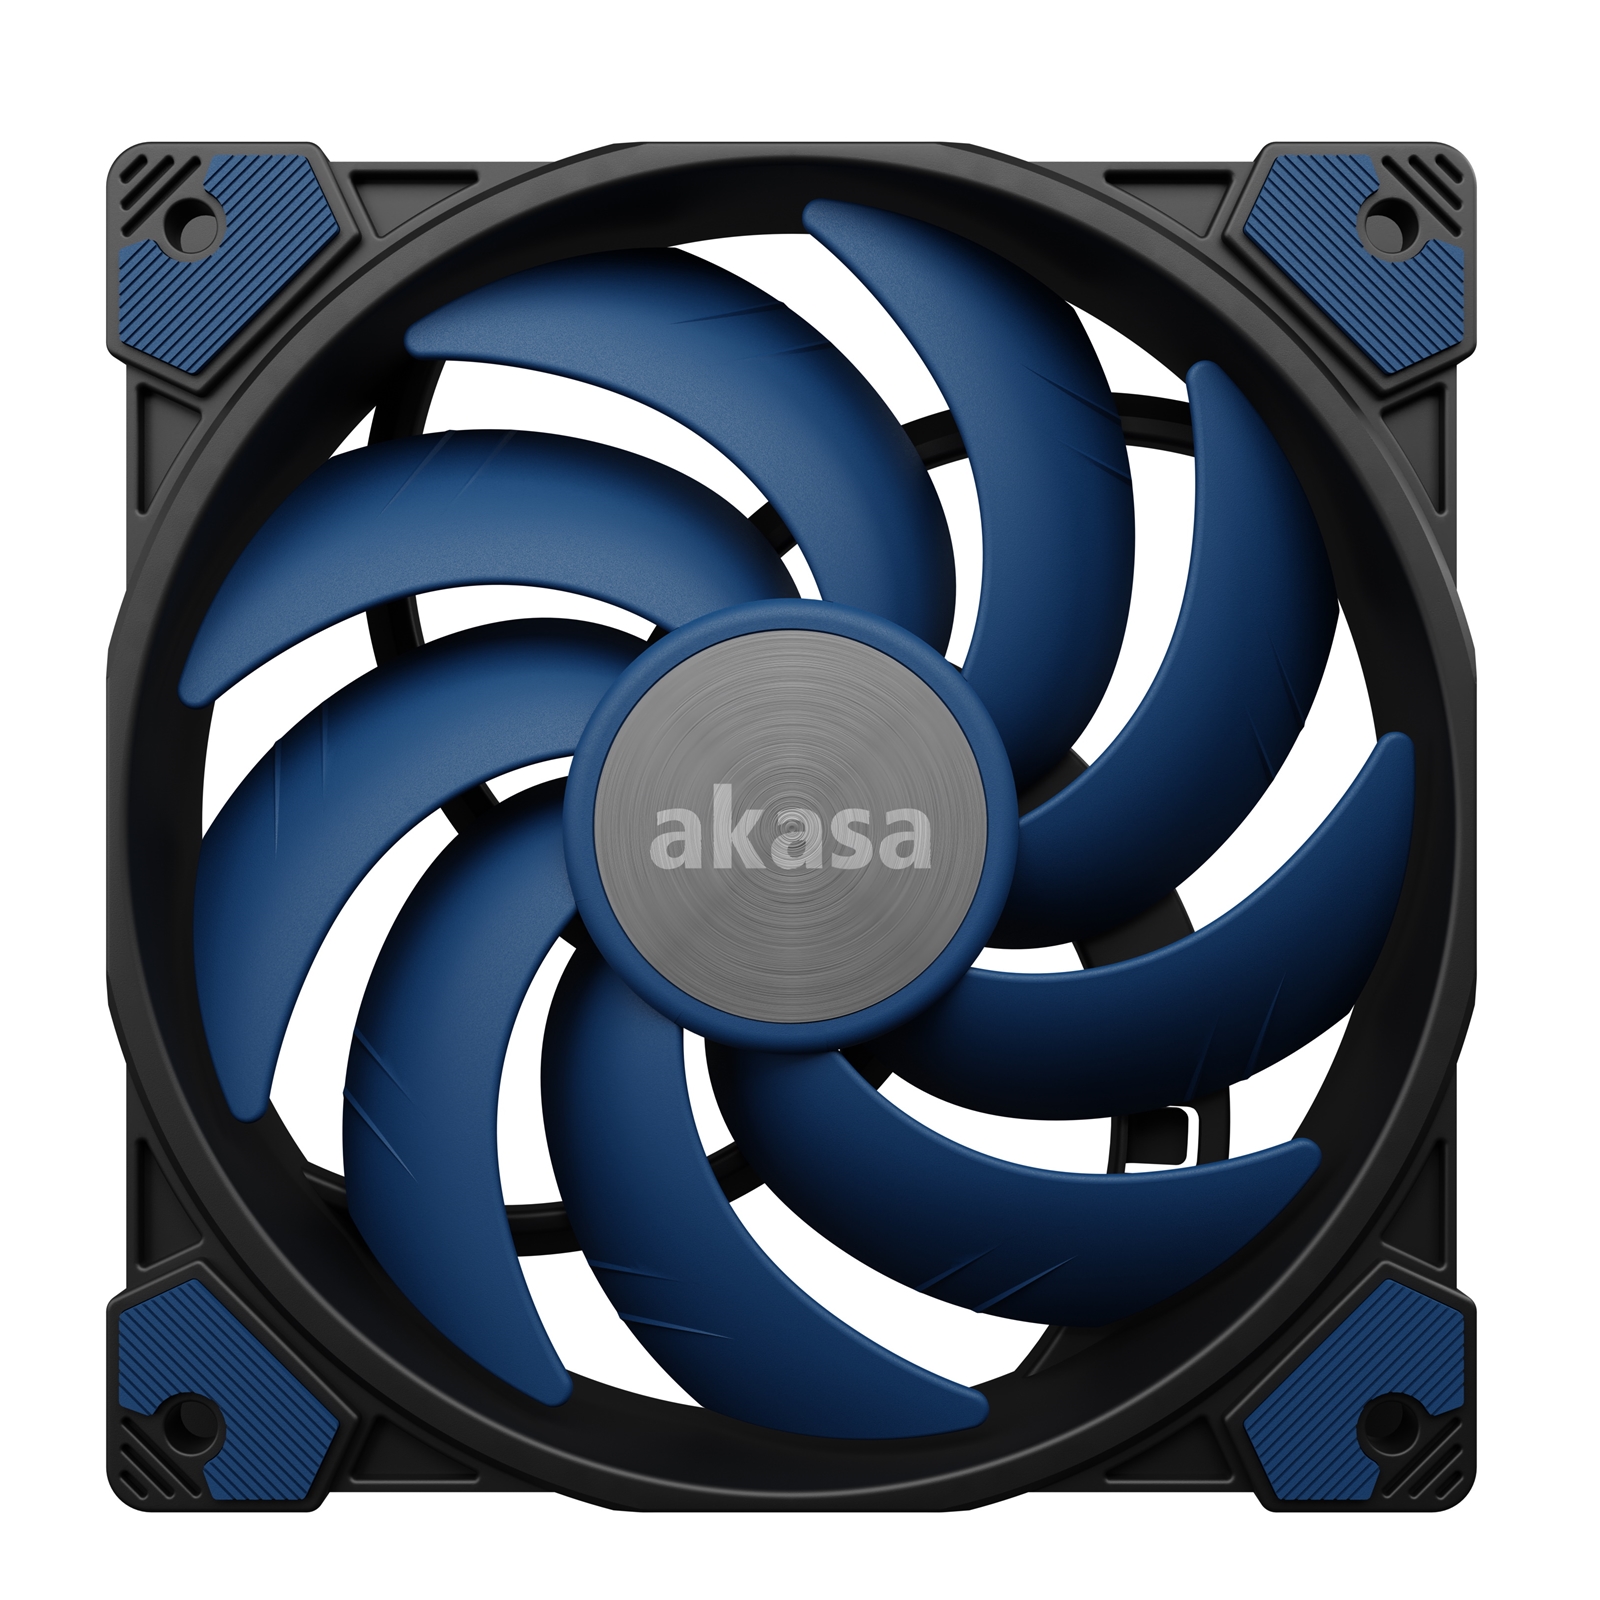 AKASA AK-FN118 Alucia SC14 Black & Blue Fan, 140mm, 1800RPM, 4-Pin PWM Connector, Premium Fan with Impressively Silent Cooling Performance